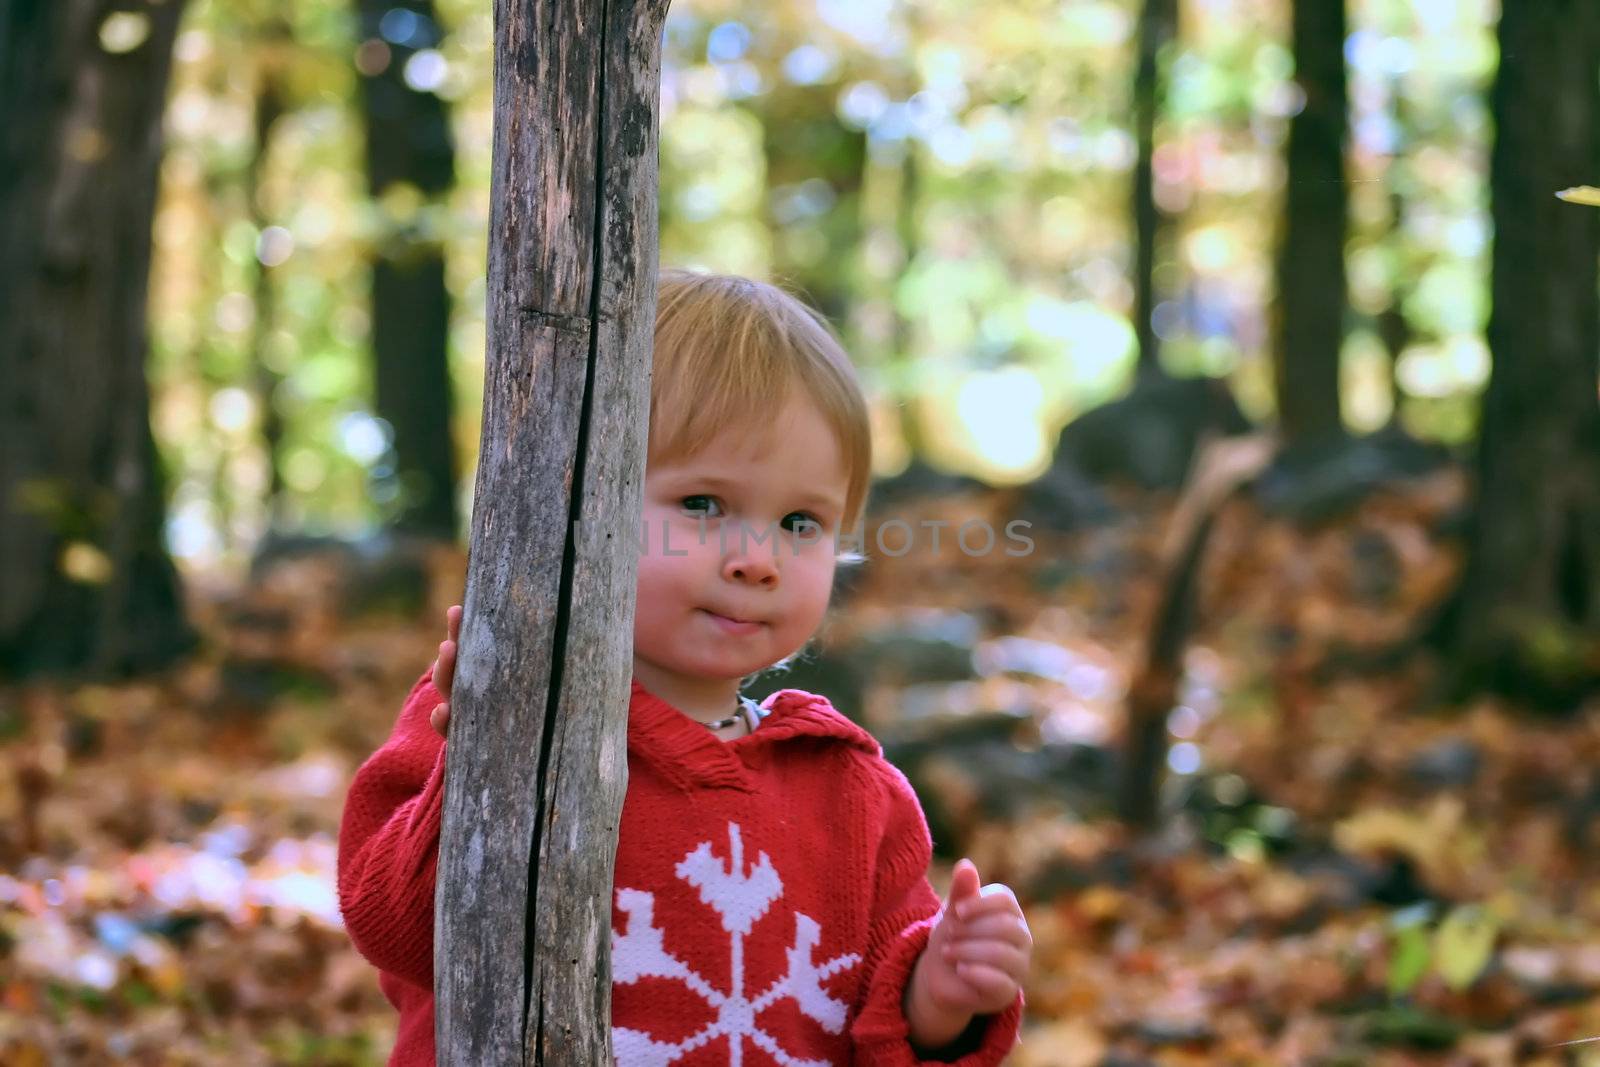 Little girl hiding behind a tree in the woods at autumn